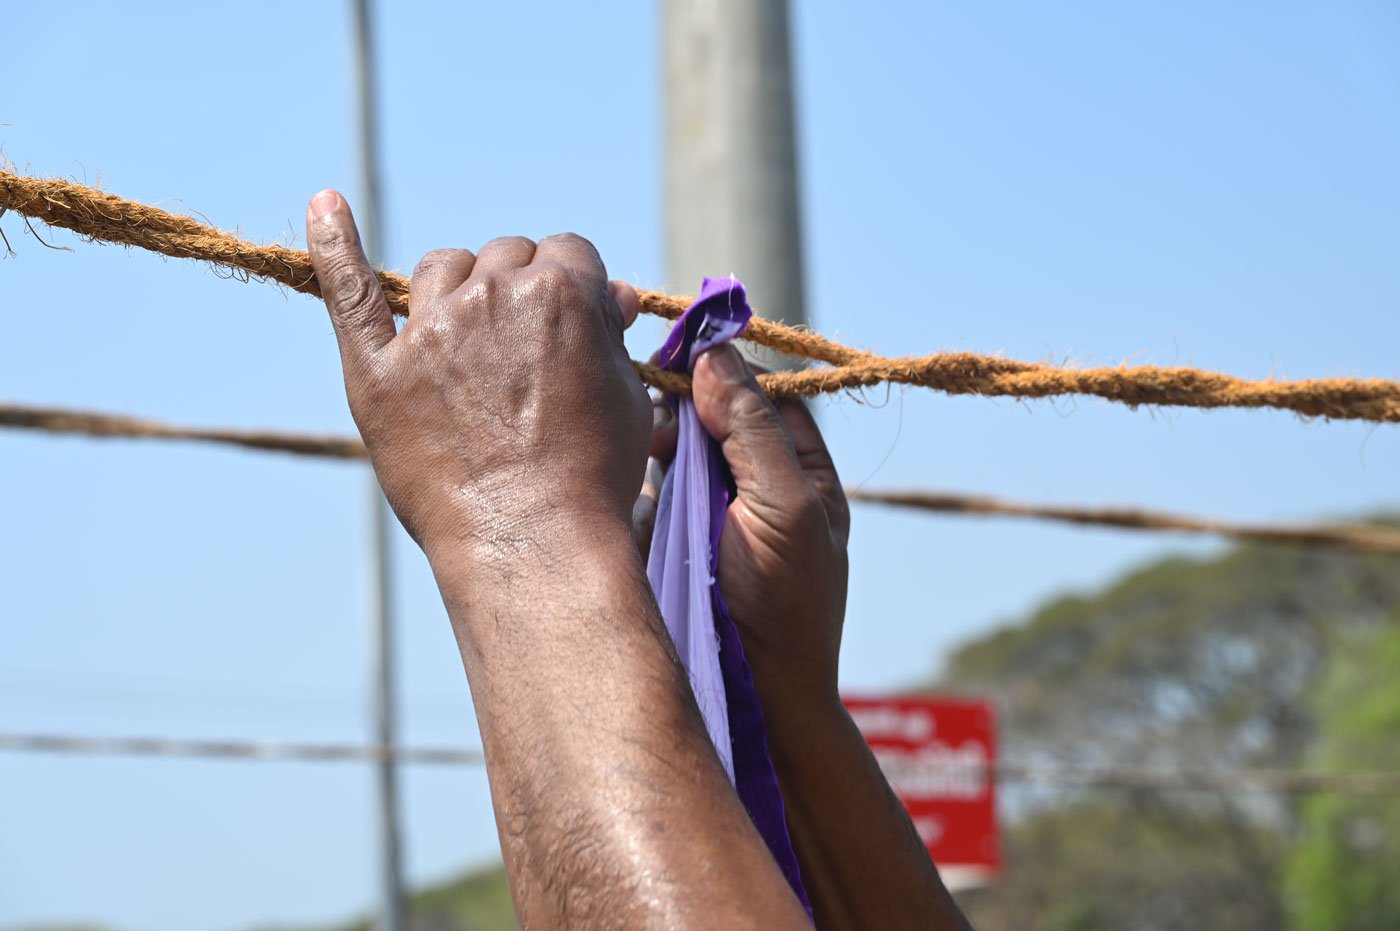 Rajan carefully tucking clothes between the ropes to keep them in place